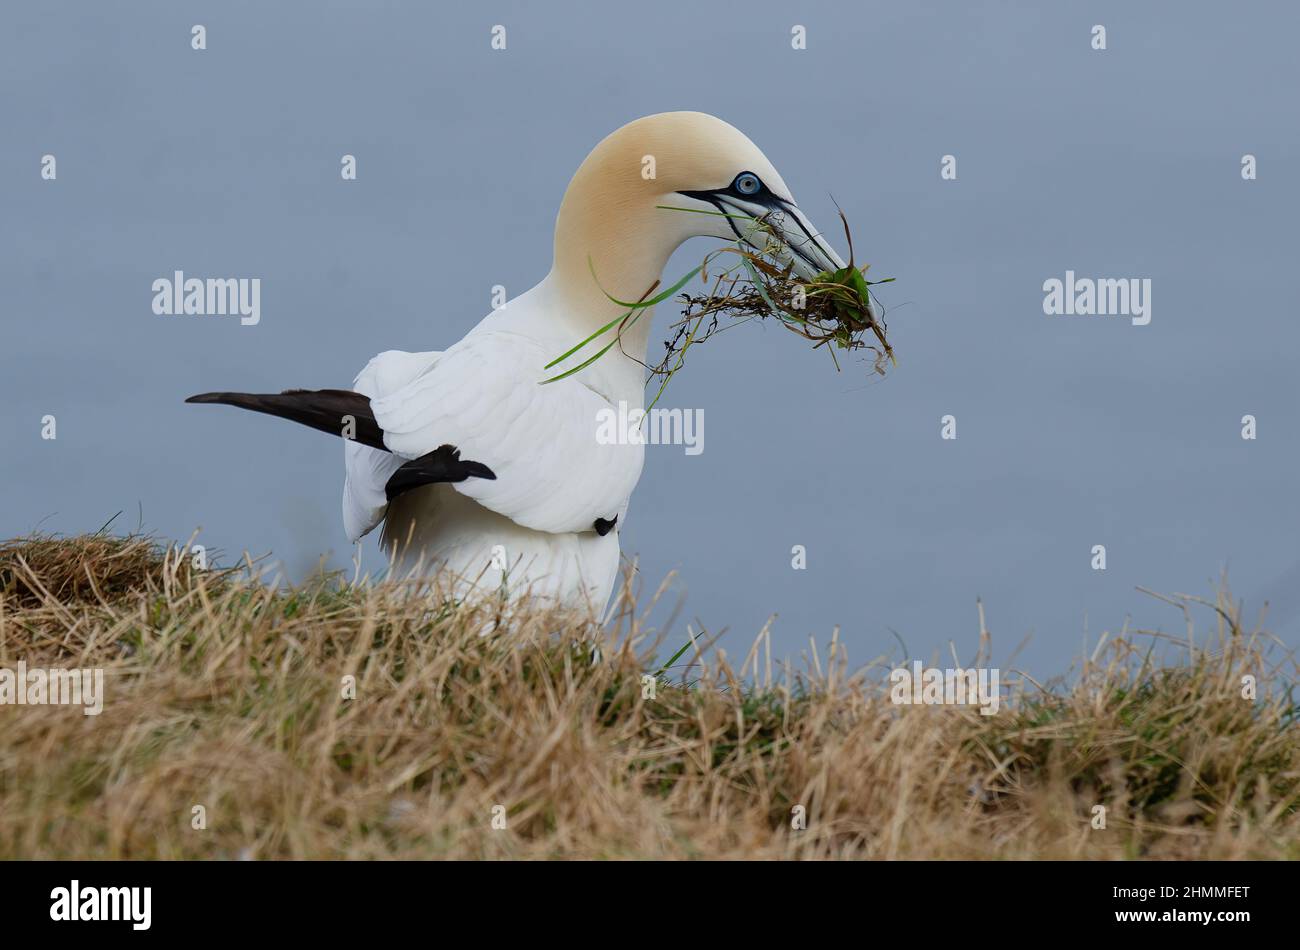 A northern gannet perched on the edge of the cliff with nest building material in its beak Stock Photo